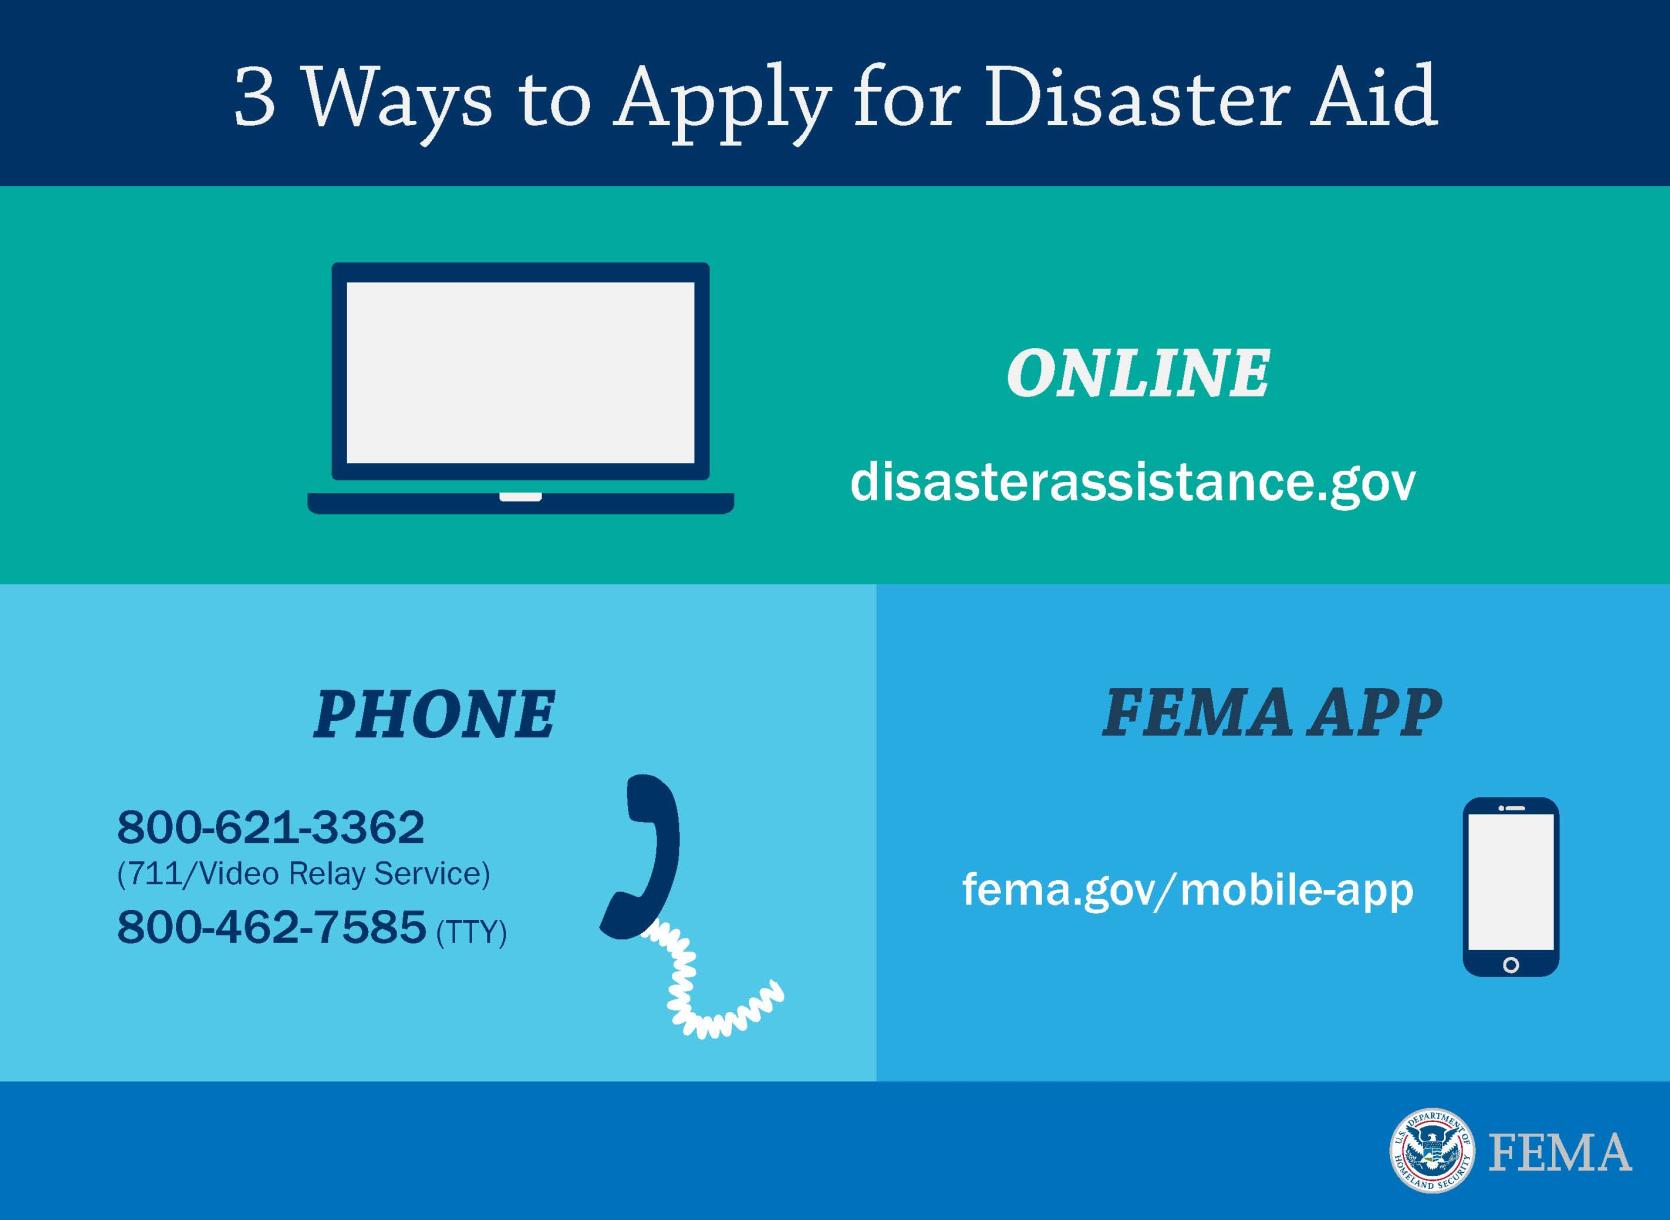 3 Ways to Apply for Disaster Aid: online disasterassistance.gov, -1800-621-3362, or the FEMA mobile app